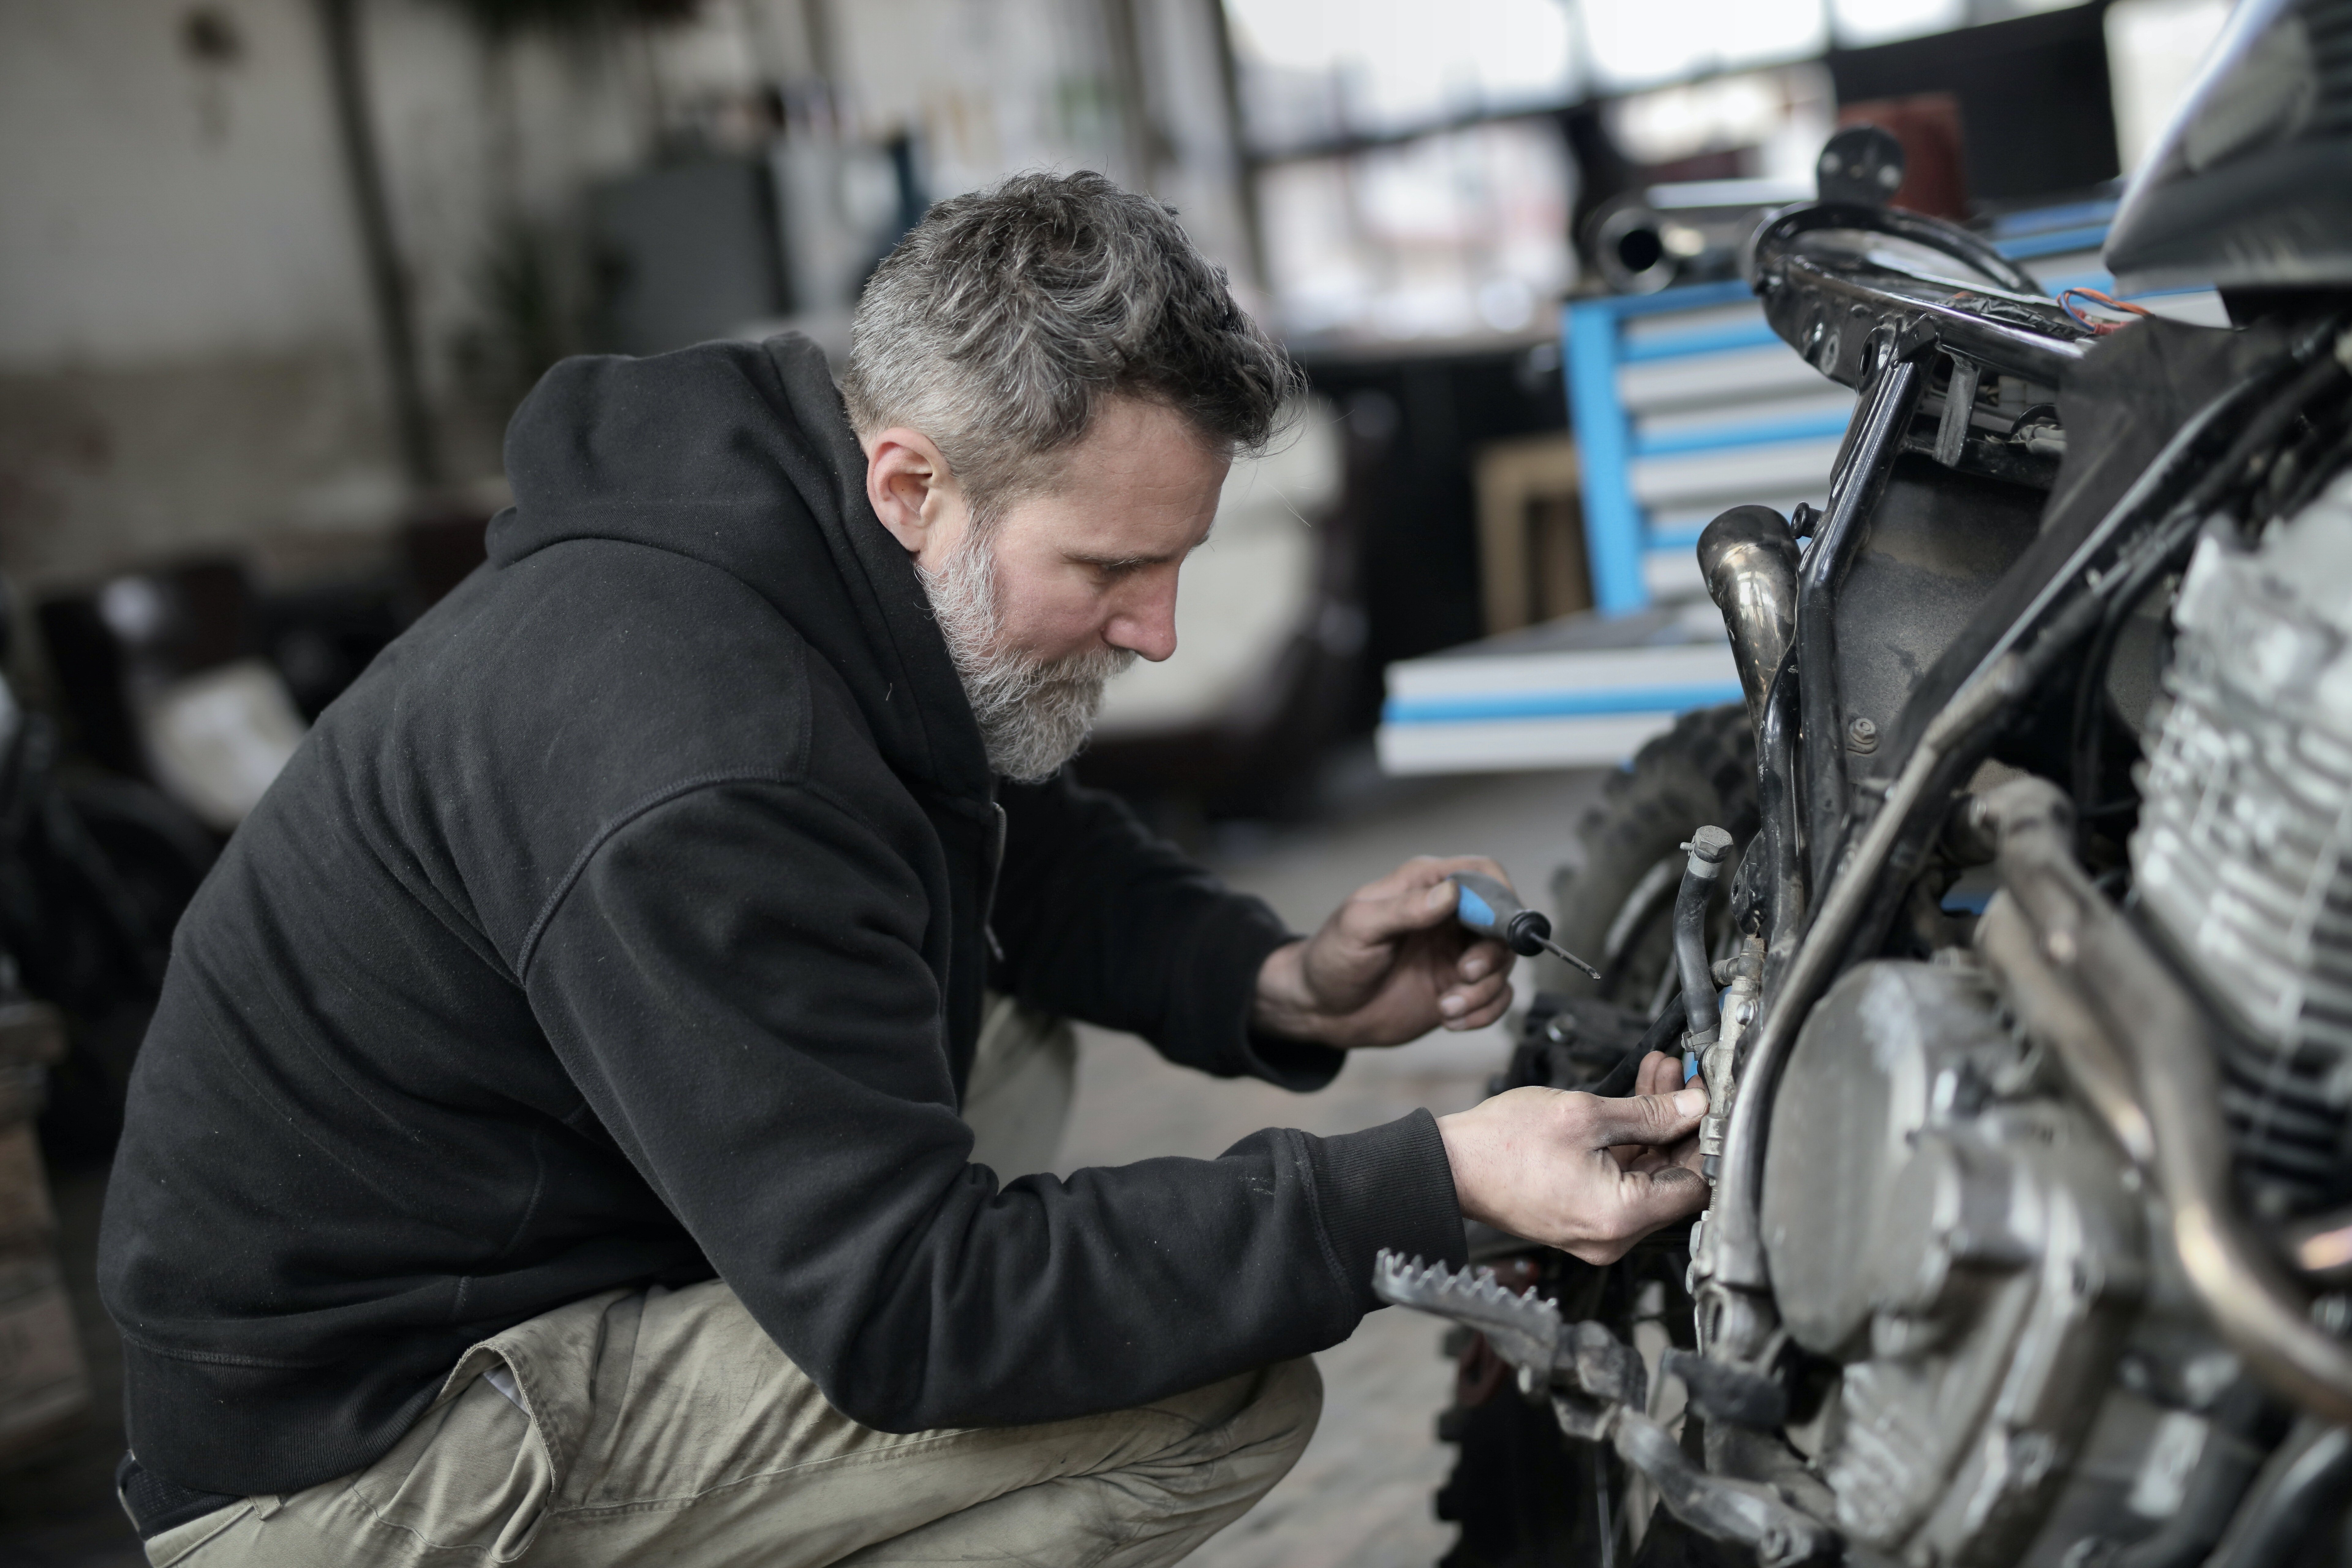 A bearded man fixing a motorcycle in a workshop. | Photo: Pexels/Andrea Piacquadio